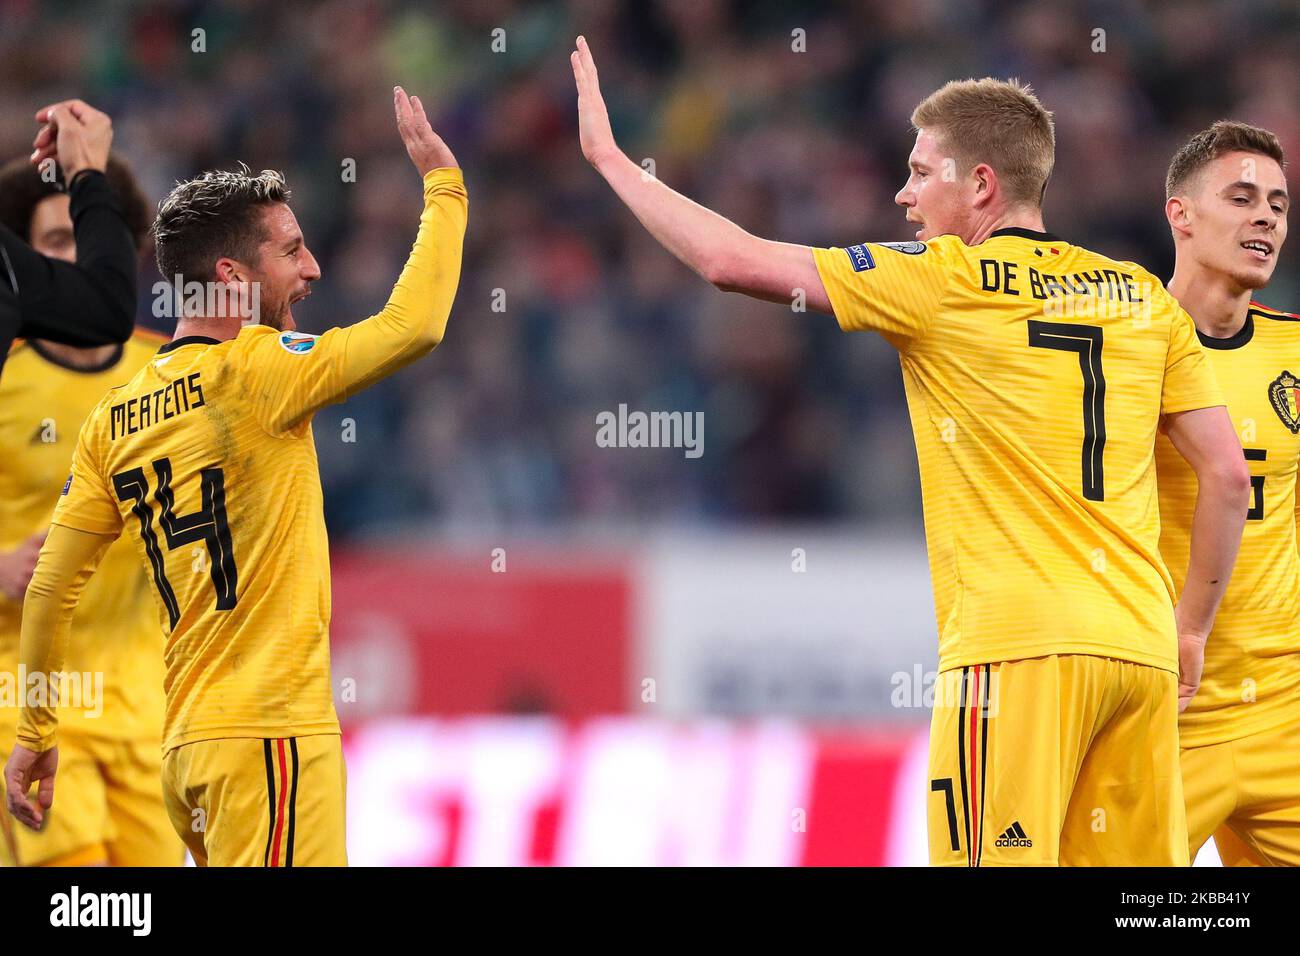 Dries Mertens (L) and Kevin De Bruyne of Belgium celebrates after scoring a goal during the UEFA Euro 2020 Qualifier between Russia and Belgium on November 16, 2019 in Saint Petersburg, Russia. (Photo by Igor Russak/NurPhoto) Stock Photo